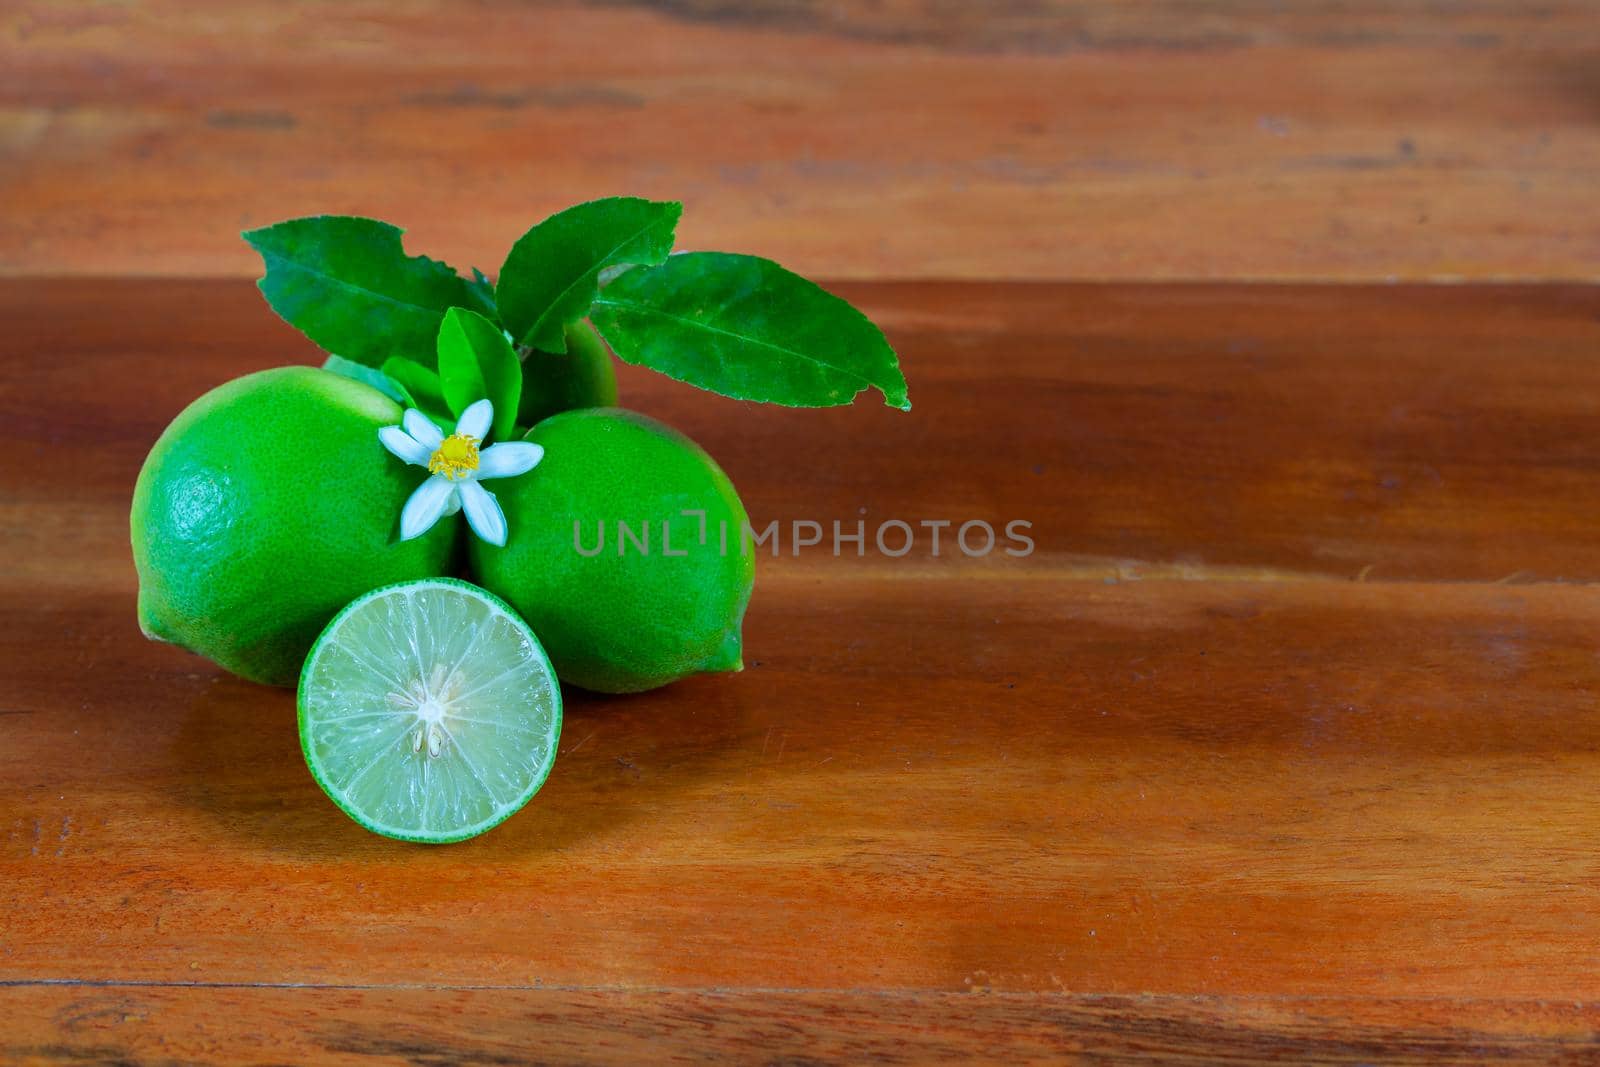 Flower, cut and whole limes on wooden background